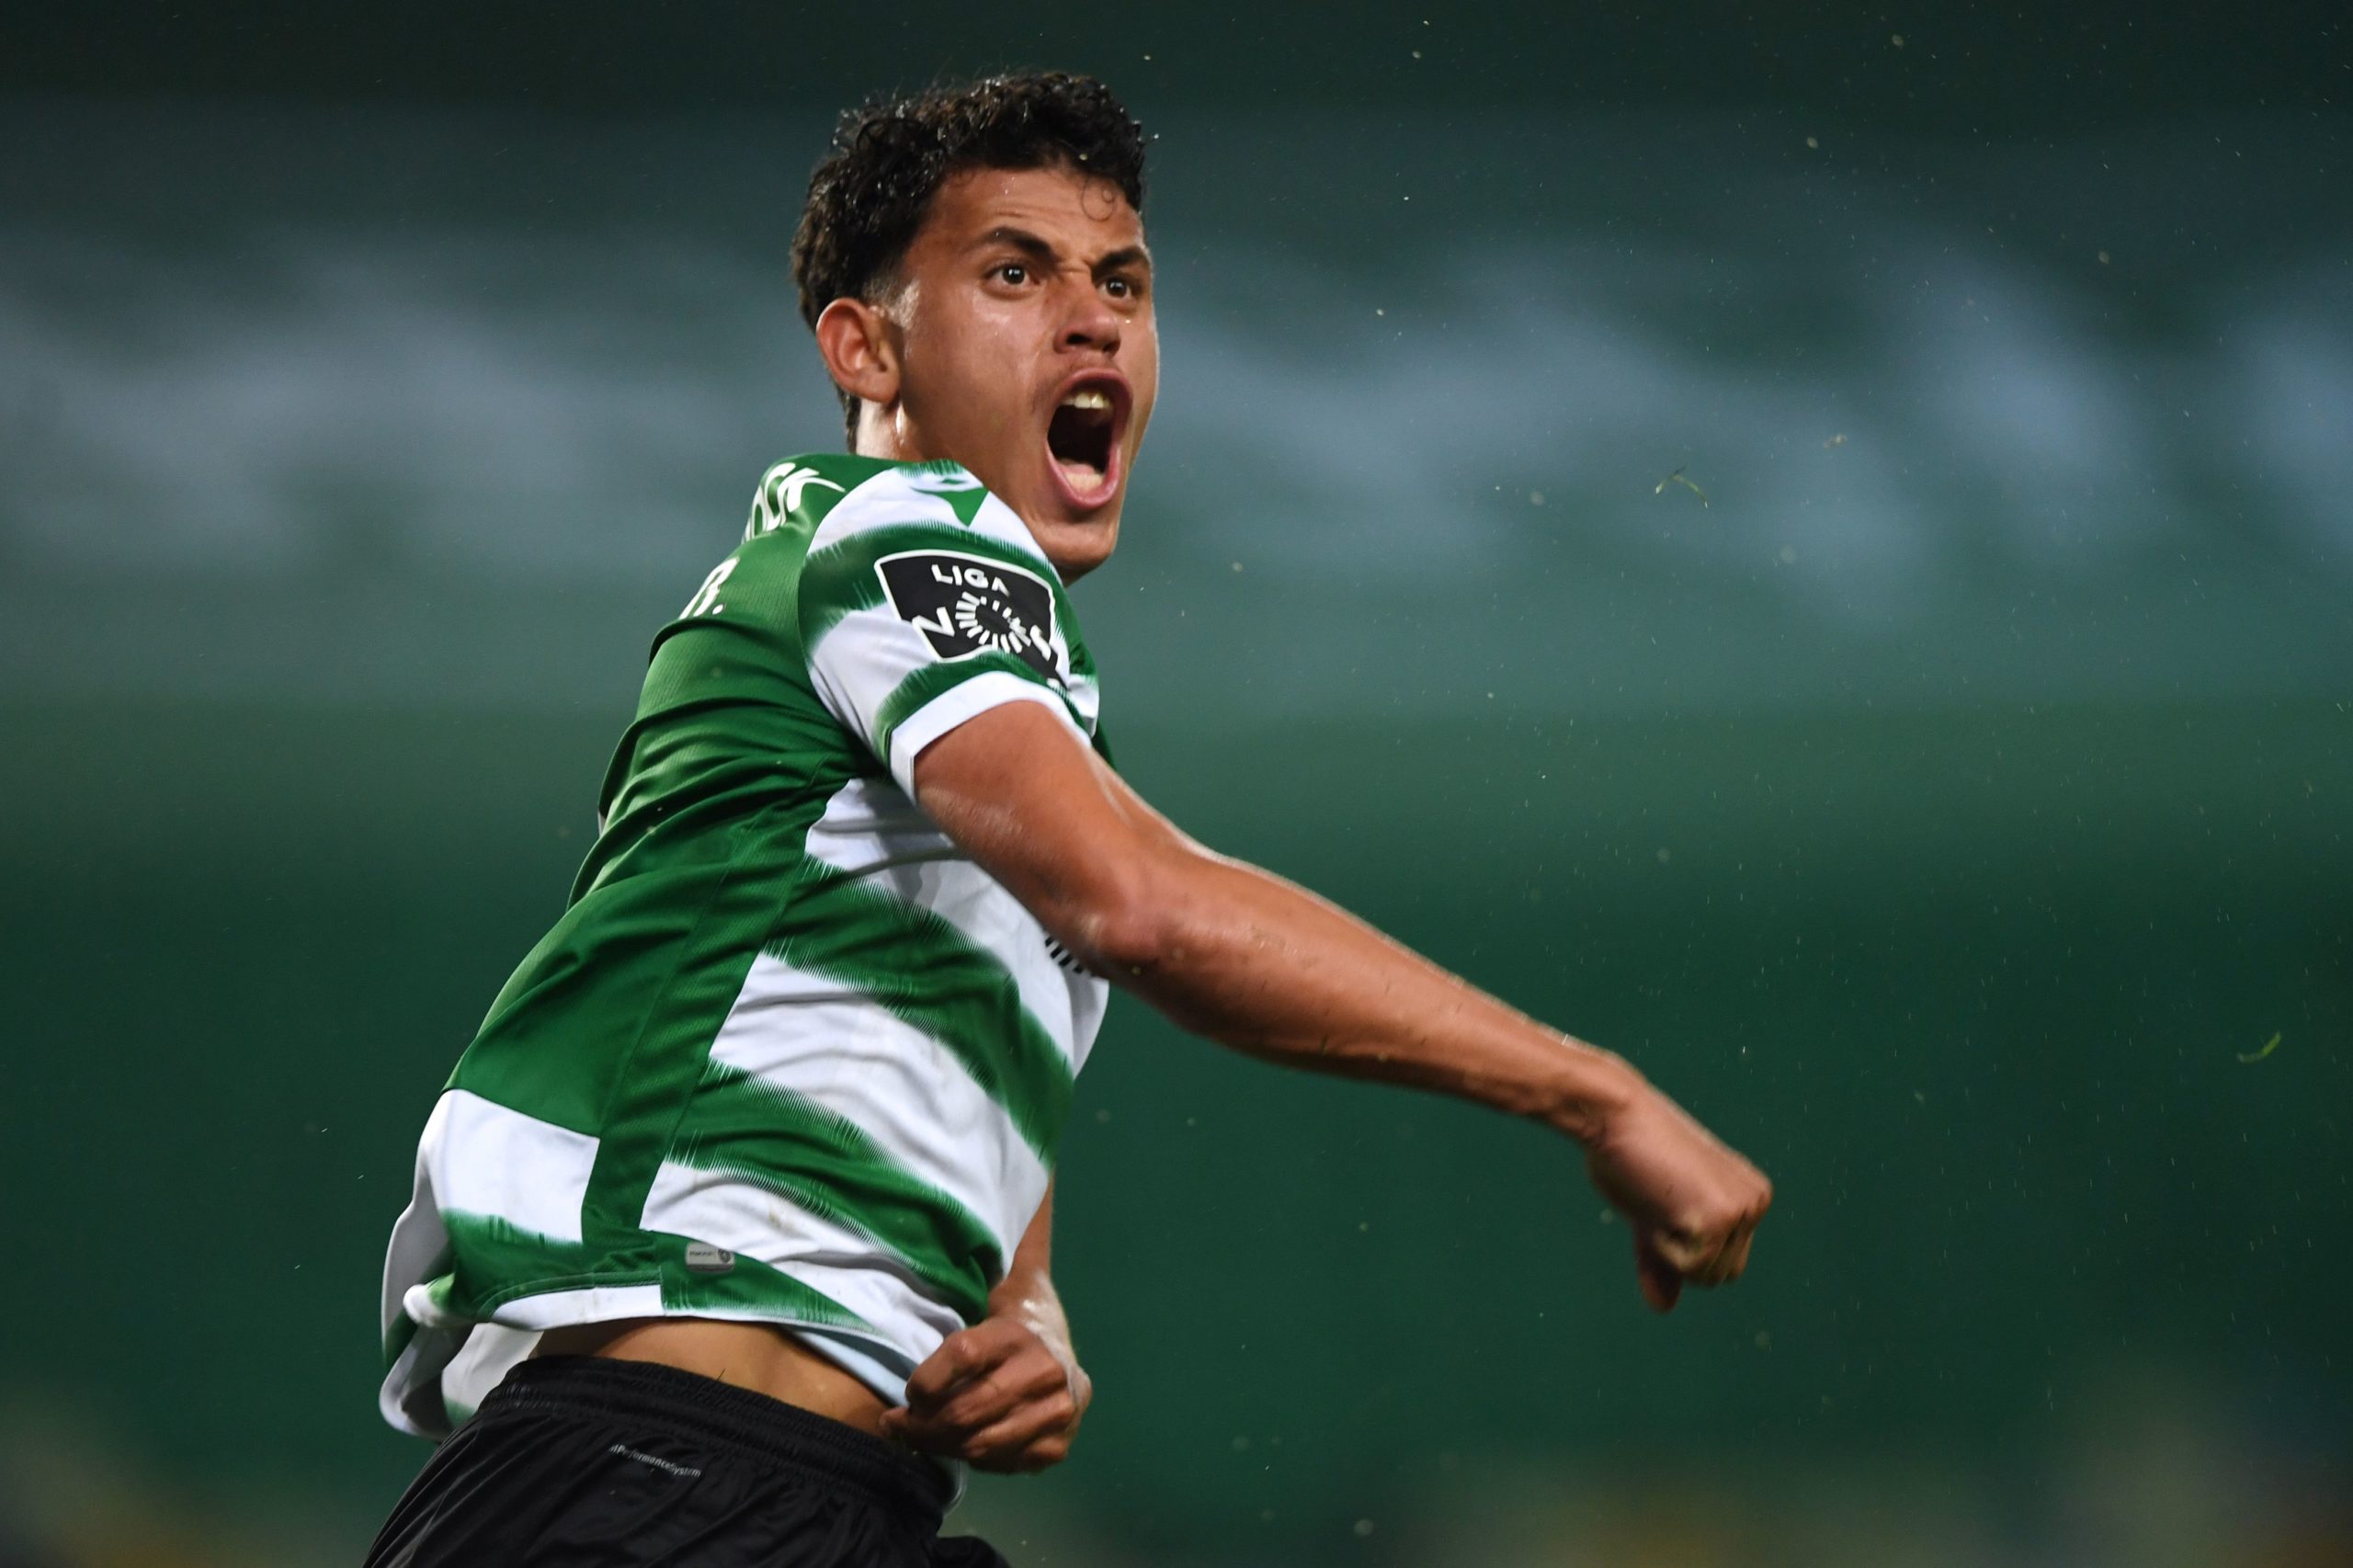 Newcastle United failed with a €13m offer for Matheus Nunes who is in action in the picture